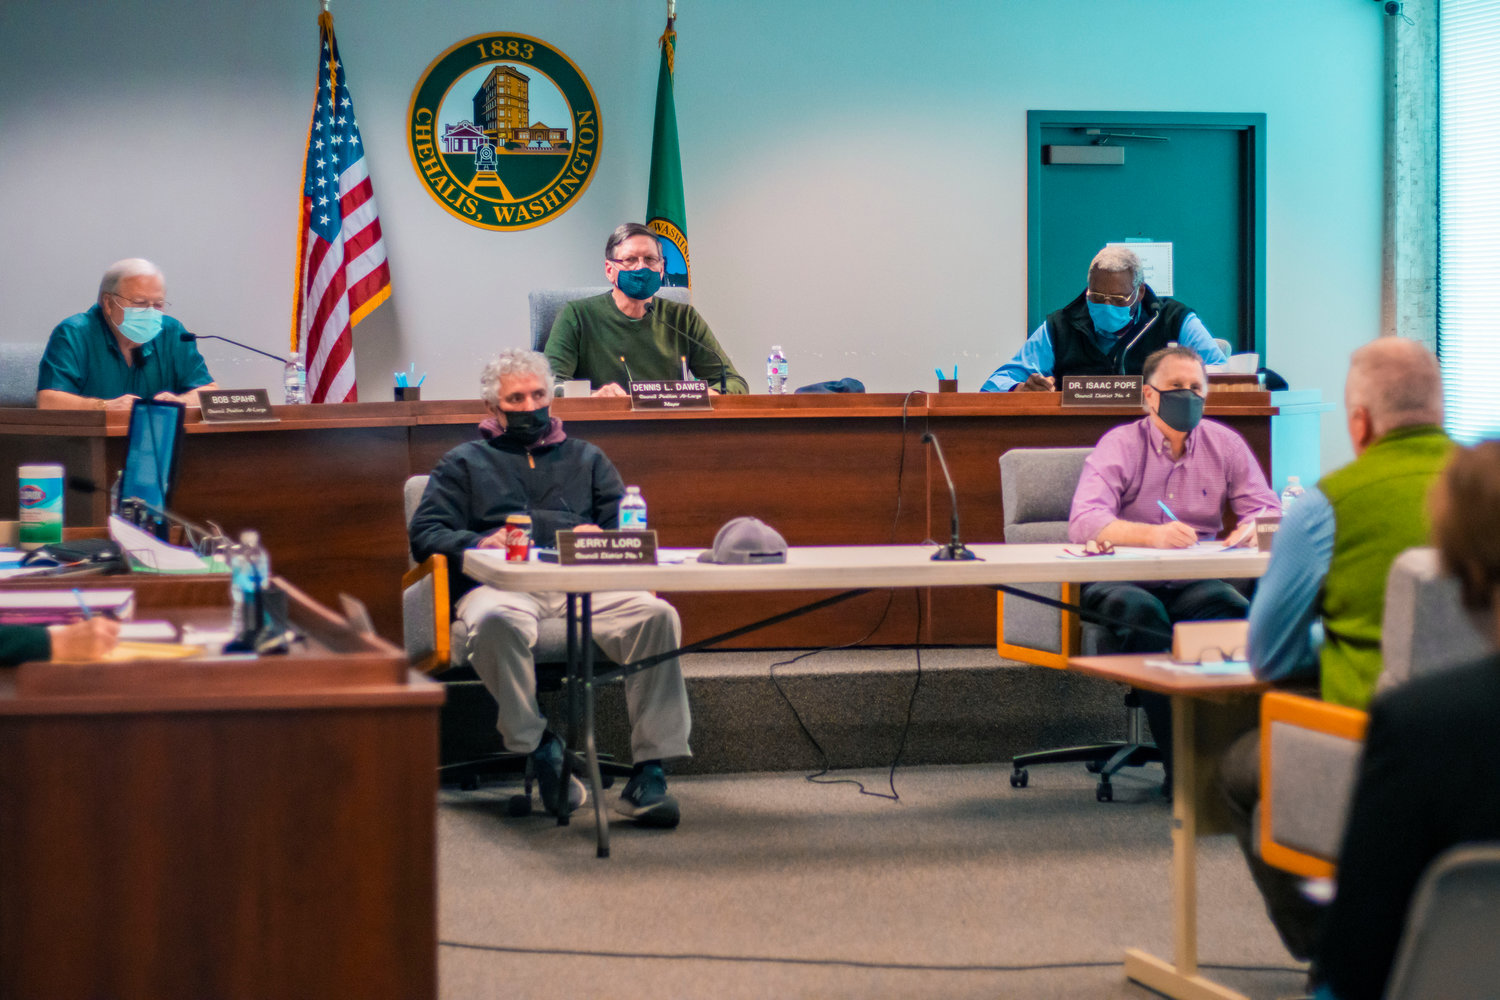 Members seek to fill the vacant position in the Chehalis City Council following former mayor pro-tem Chad Taylor’s resignation, Monday afternoon in City Hall.